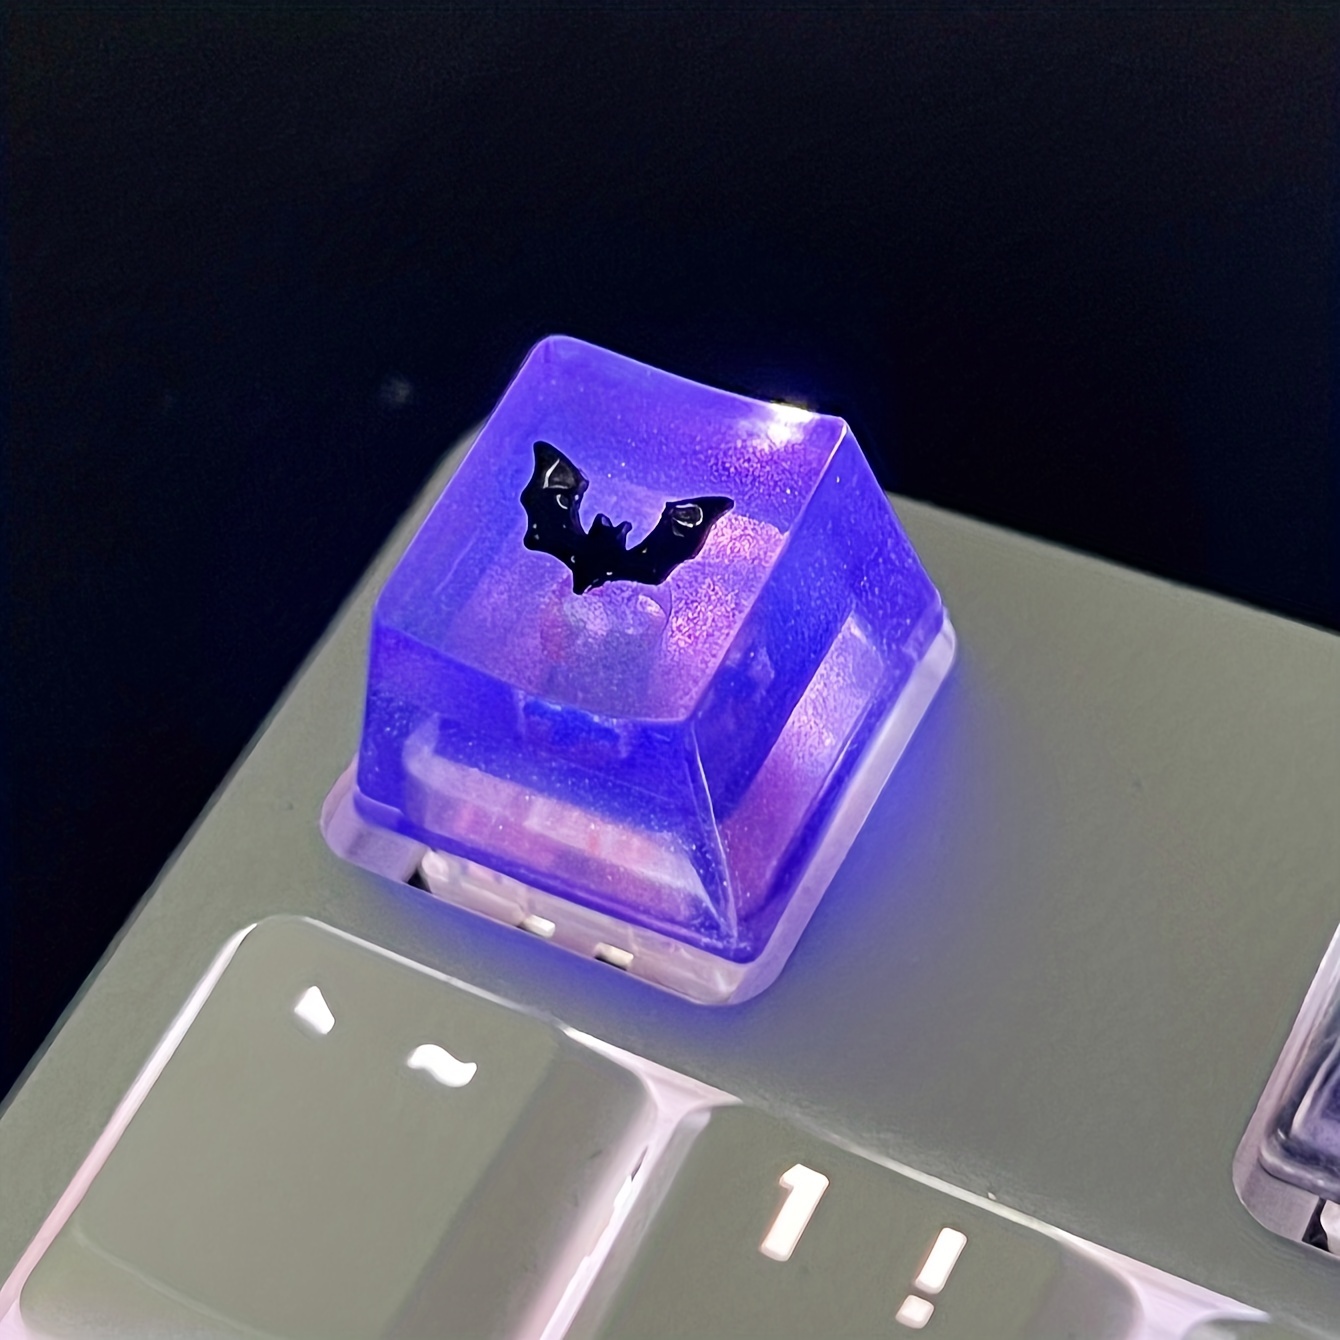 1pc Cute Multicolor Abs Resin Cherry Blossom Key Cap Compatible With  Mechanical Keyboard Accessory, Translucent & Scratch-resistant